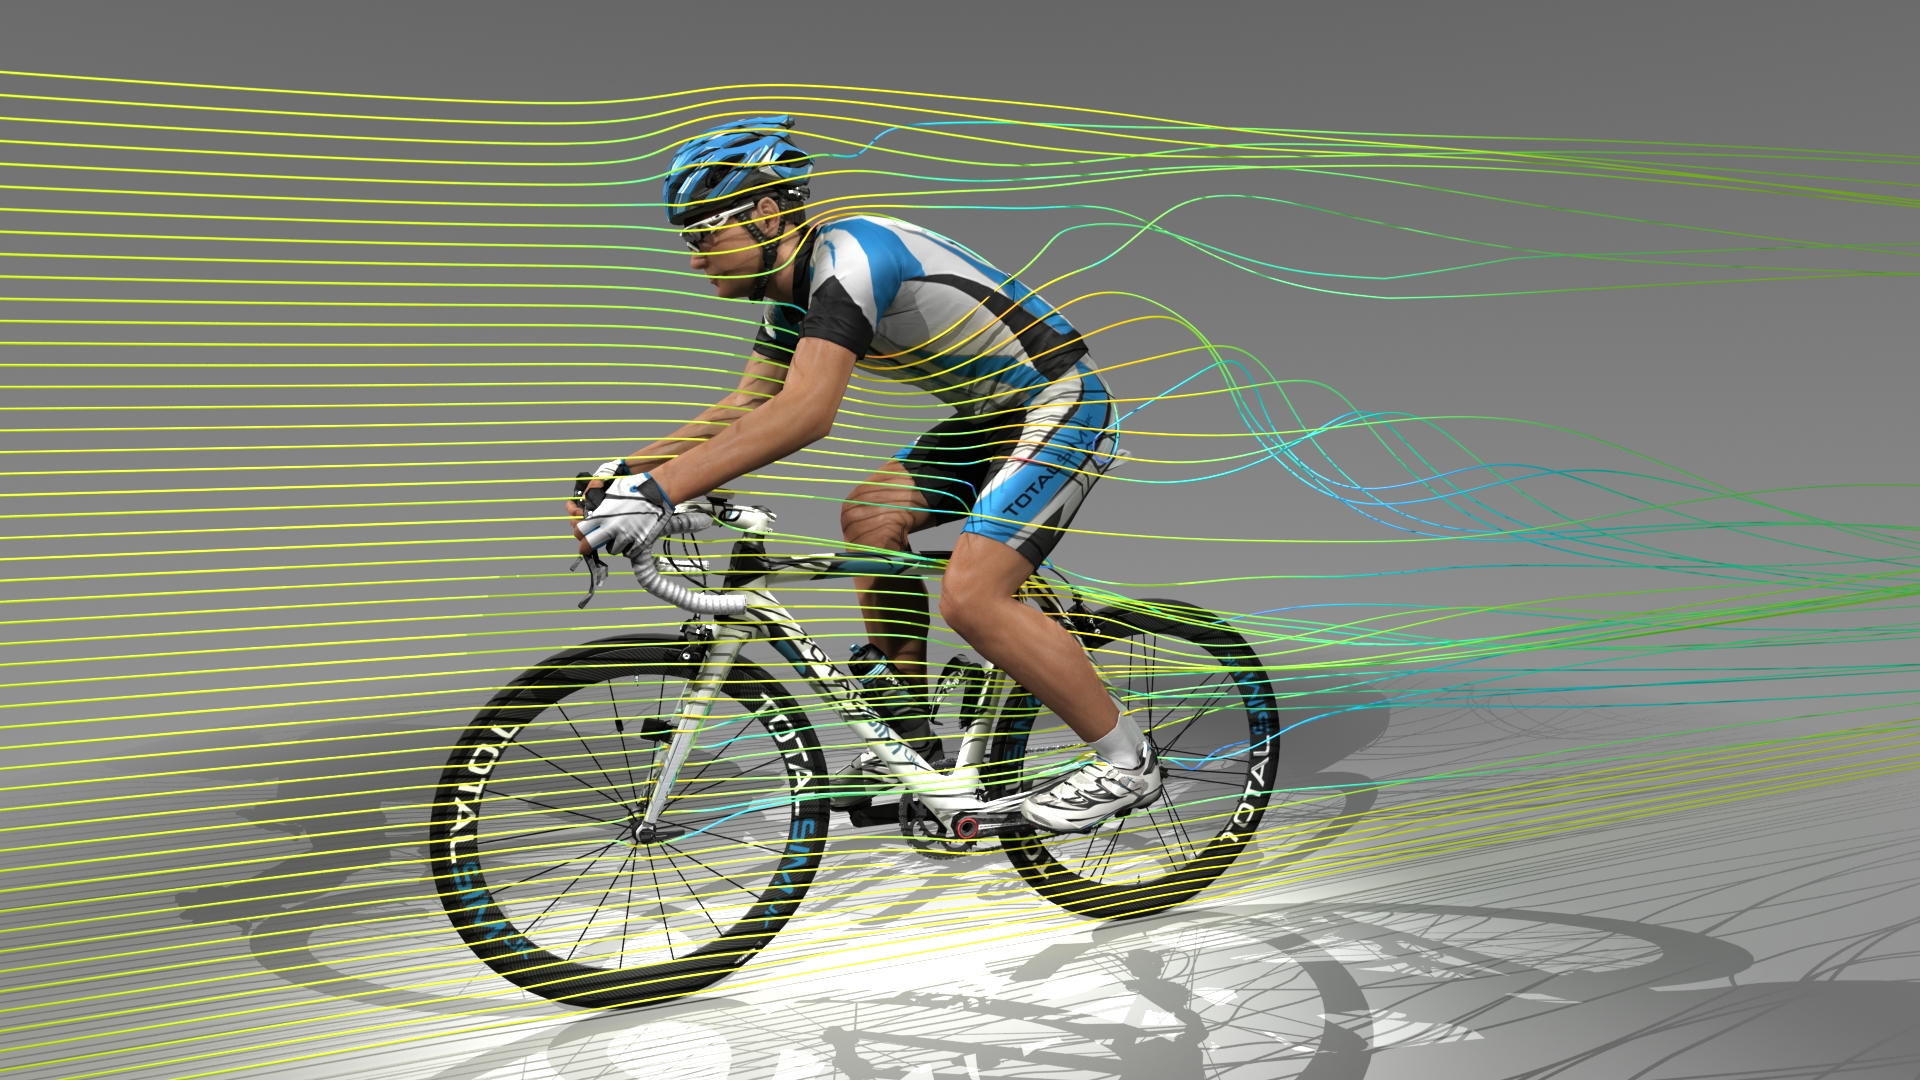 Diagram showing drag of a human on a bicycle